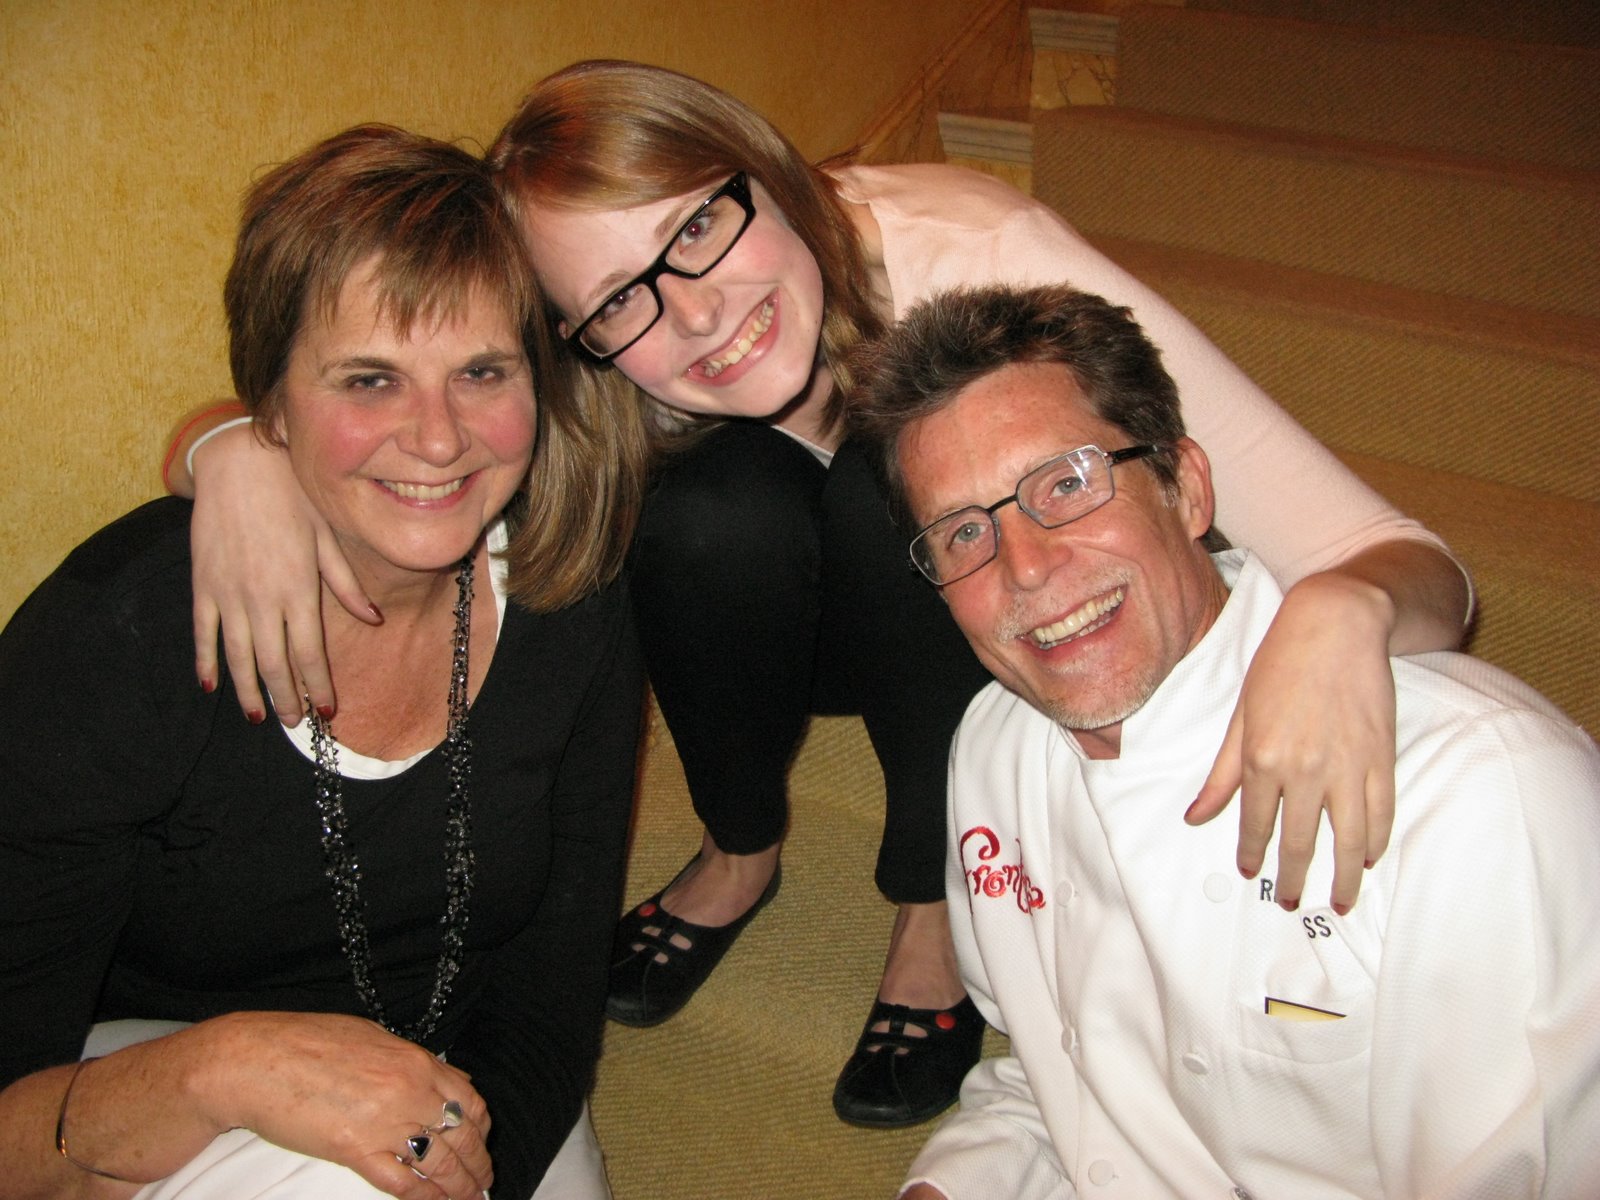 Rick Bayless Daughter – Who is she